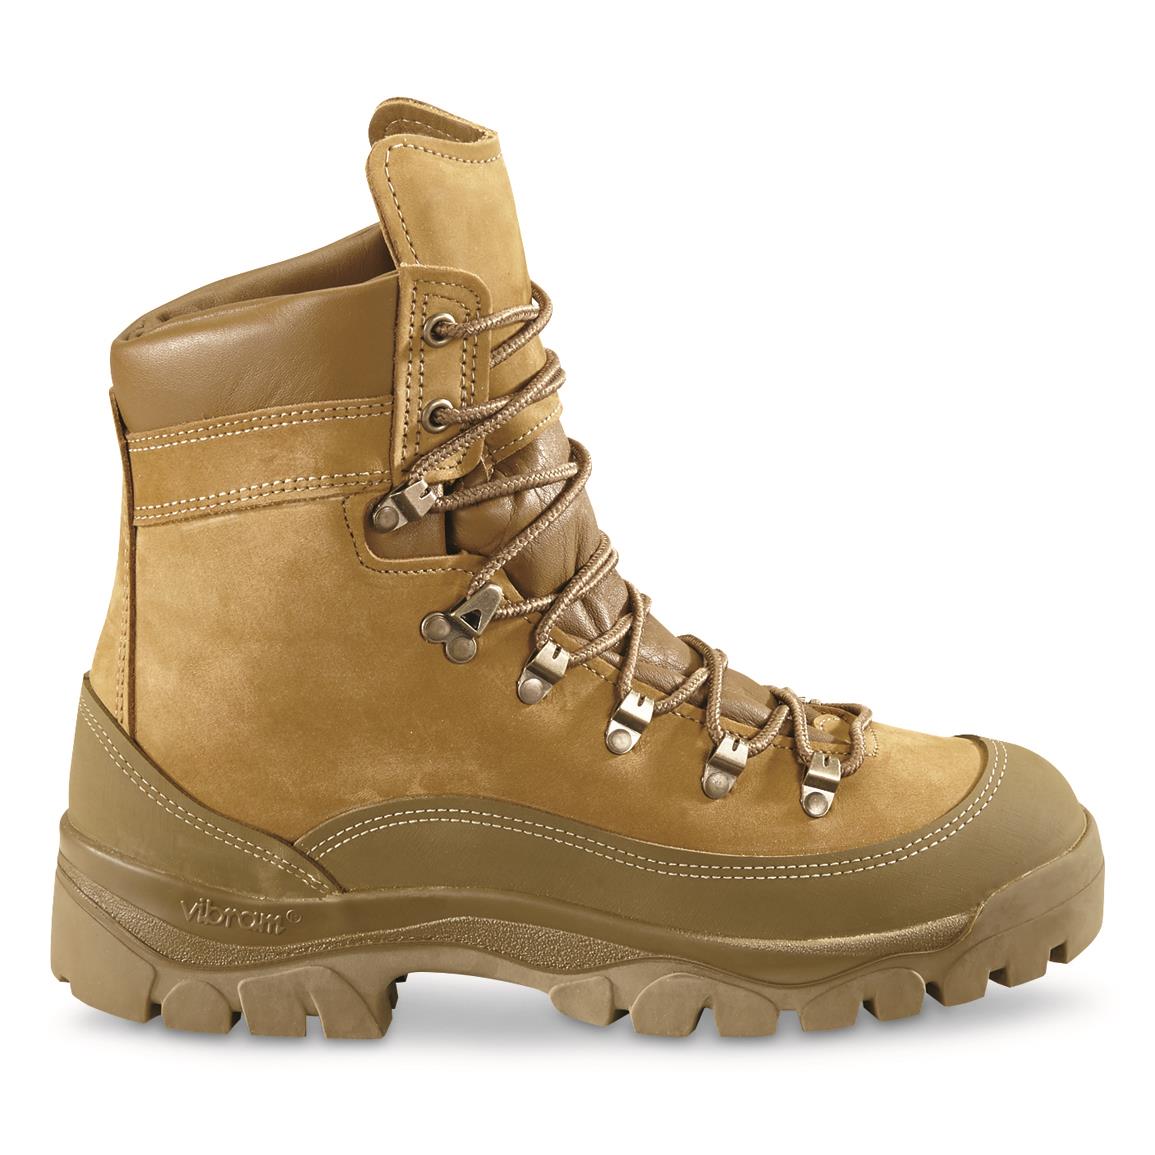 Army Mountain Boots - Army Military